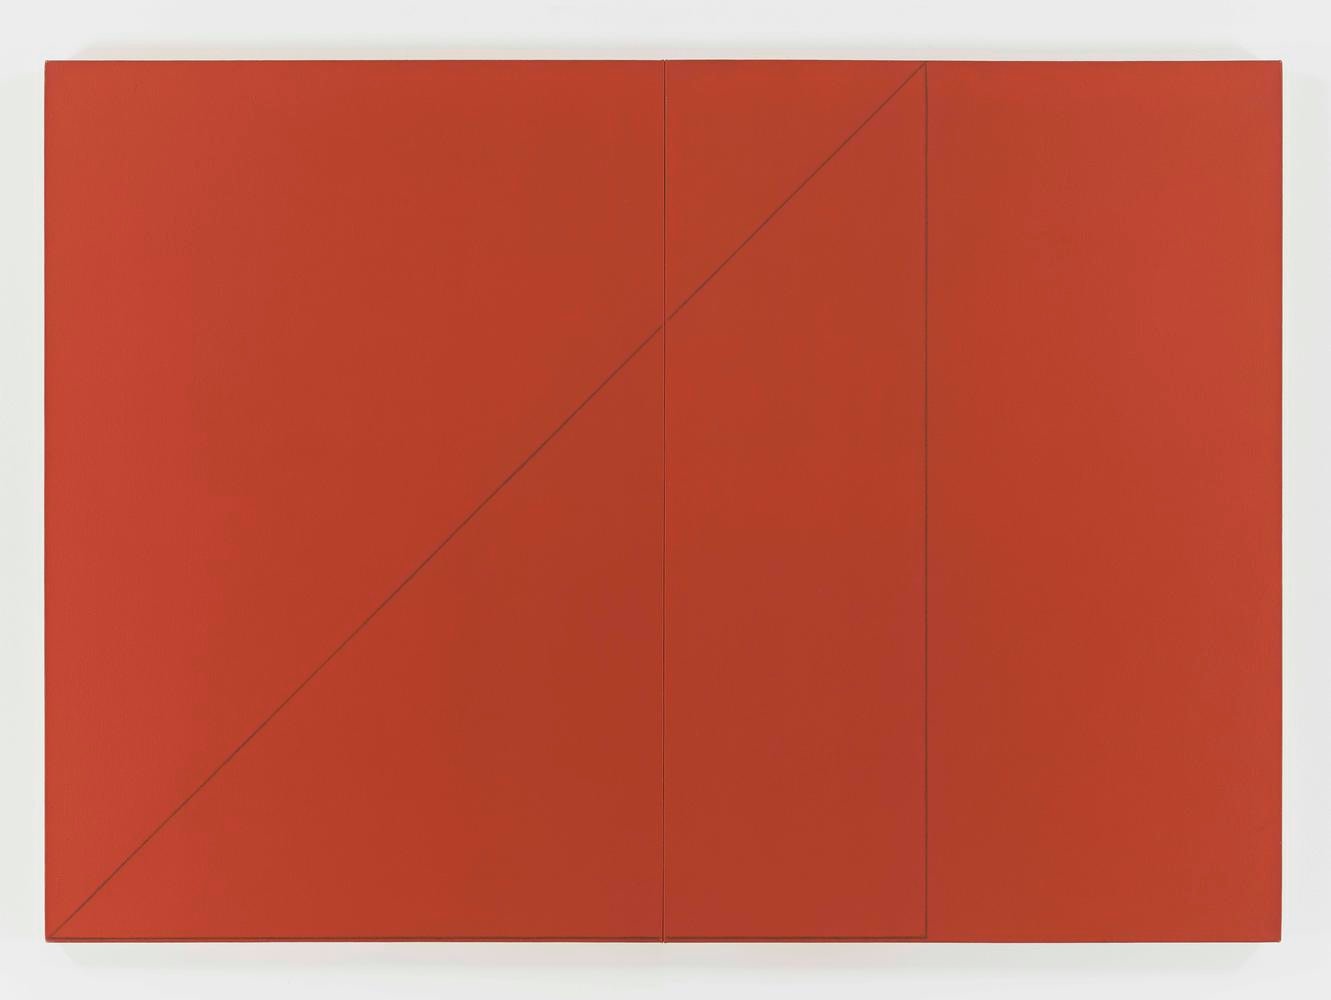 Robert Mangold
A Triangle Within Two Rectangles (Red)
1977
acrylic and black pencil on canvas.
49 1/2 x 69 1/2 inches (125.7 x 176.5 cm)